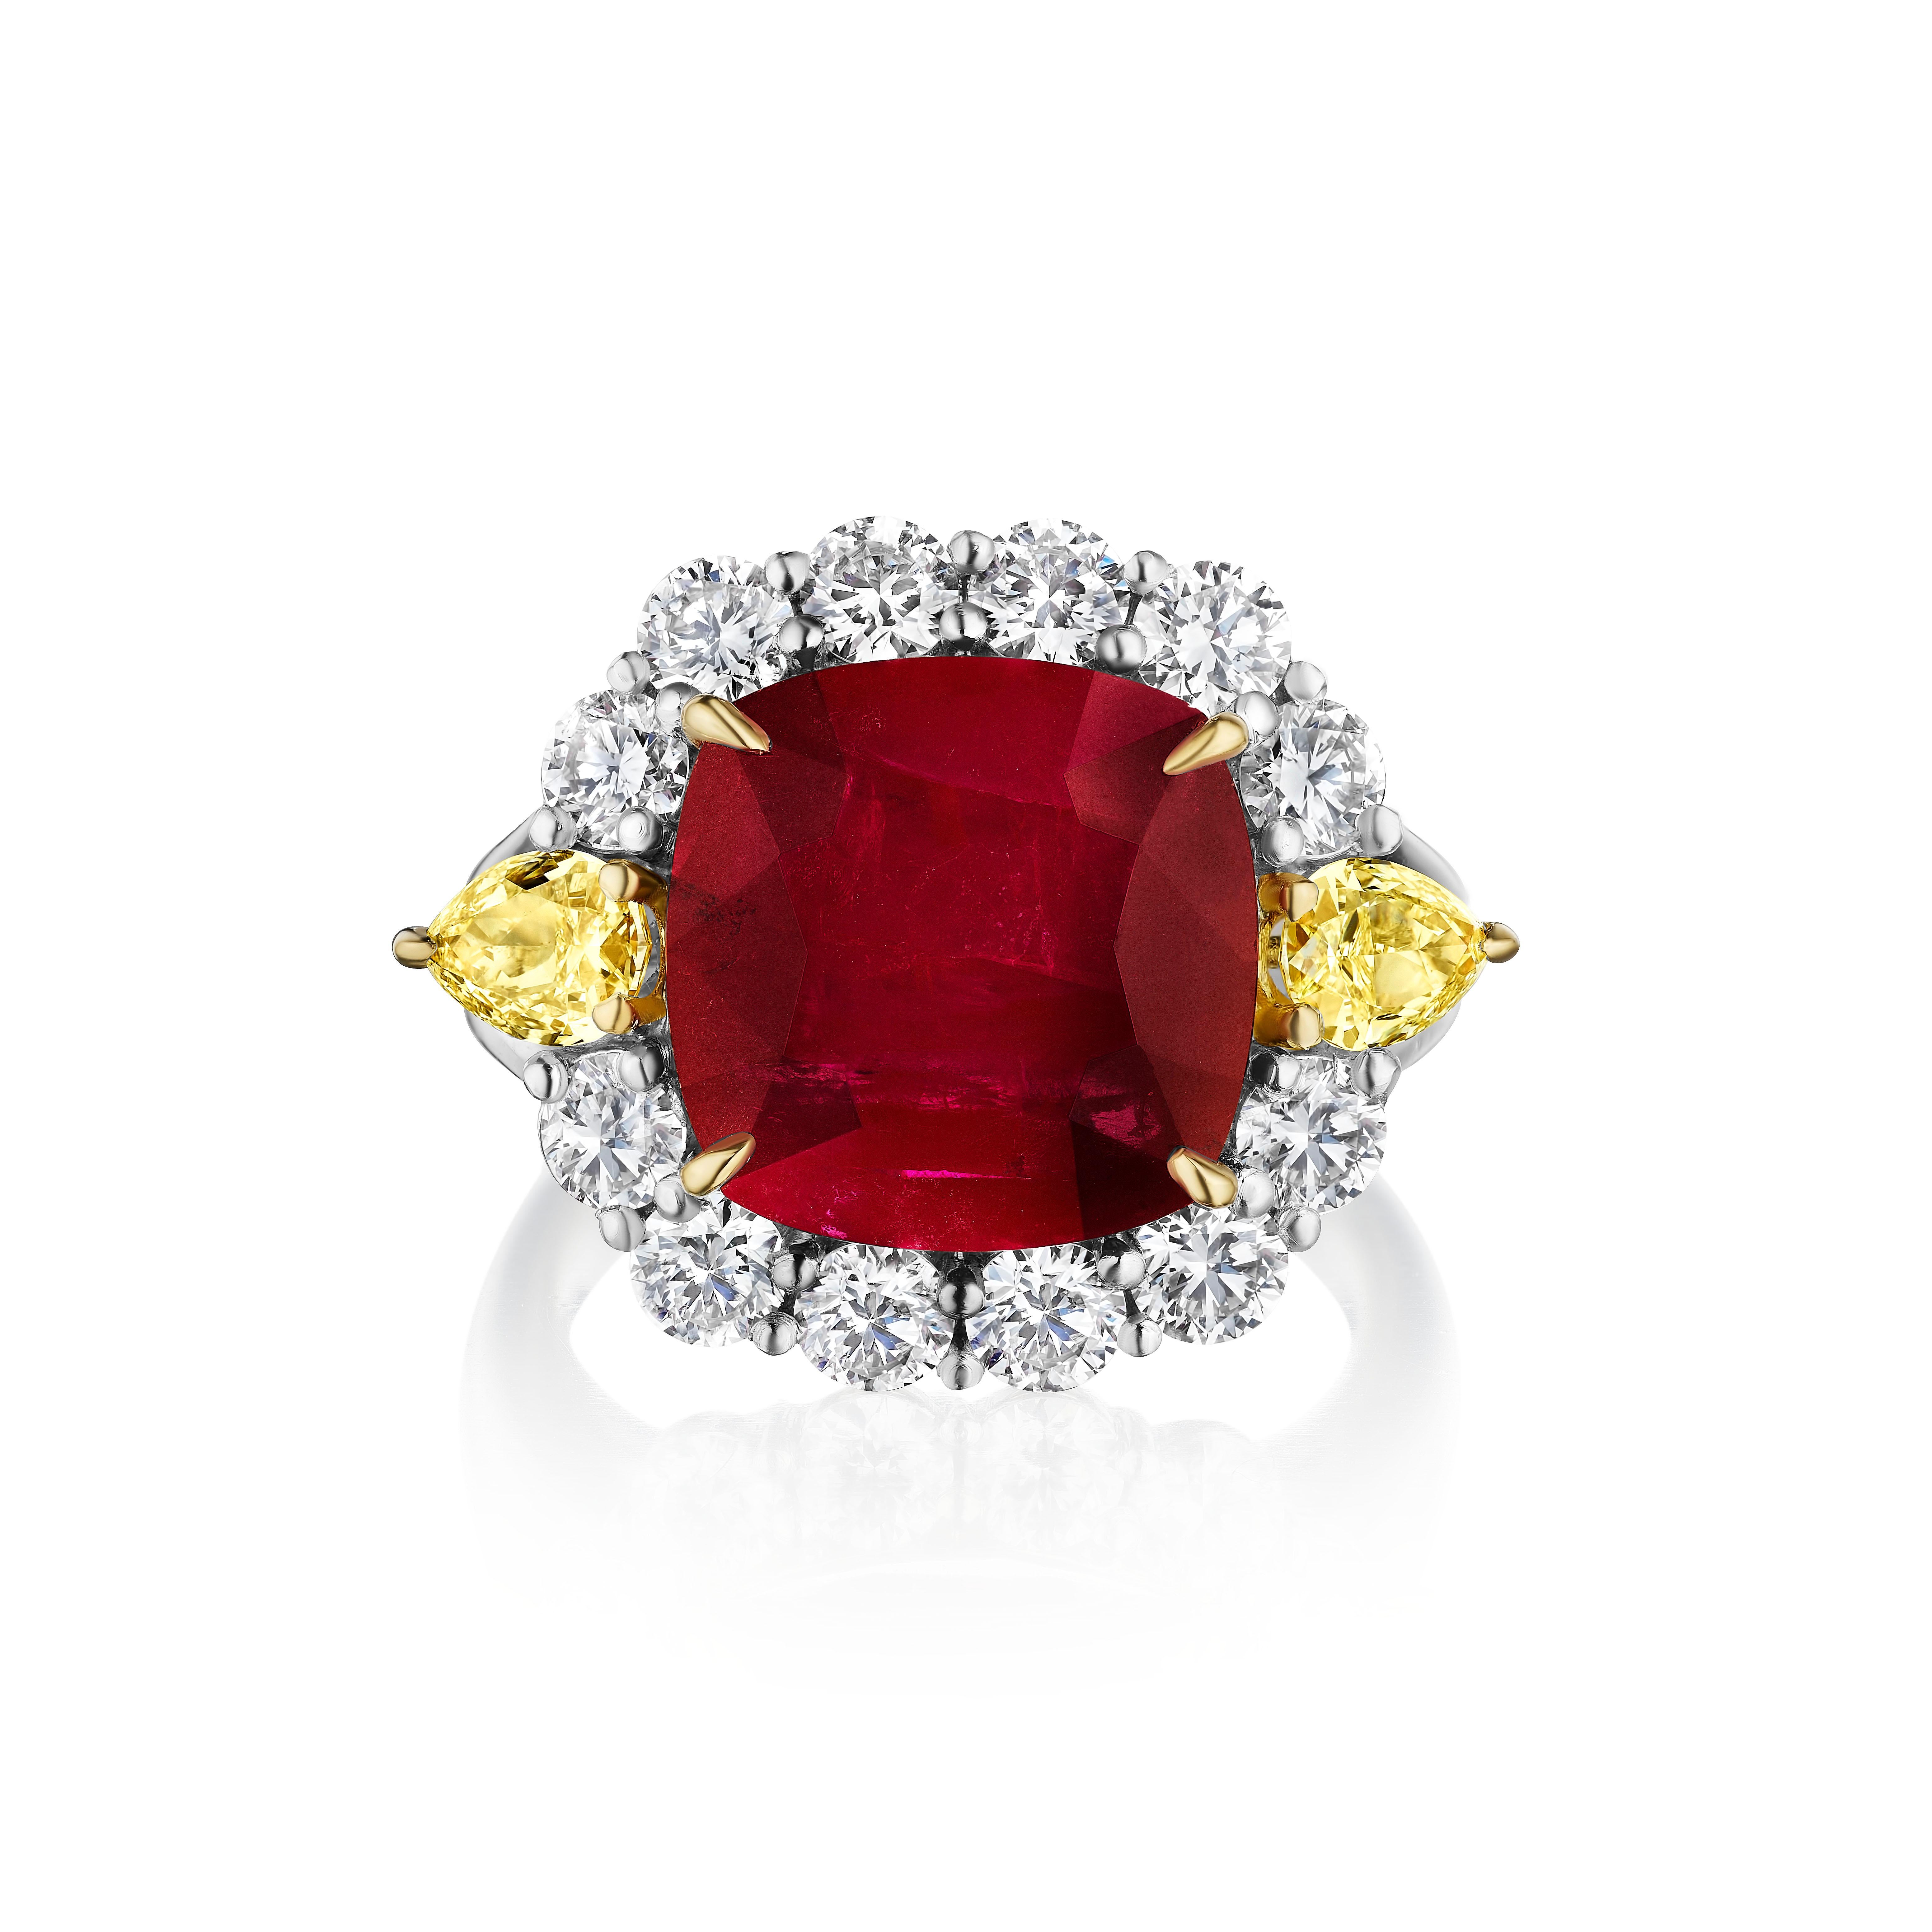 Centered upon a 7.32 Carat Cushion shaped Ruby, accompanied by AGL certificate stating it is heated. 

Flanked by Pear shaped Yellow Diamonds weighing 0.80 Carats. 
Surrounded by 12 Round Diamonds weighing 1.35 Carats

Set in Platinum and 18 Karat